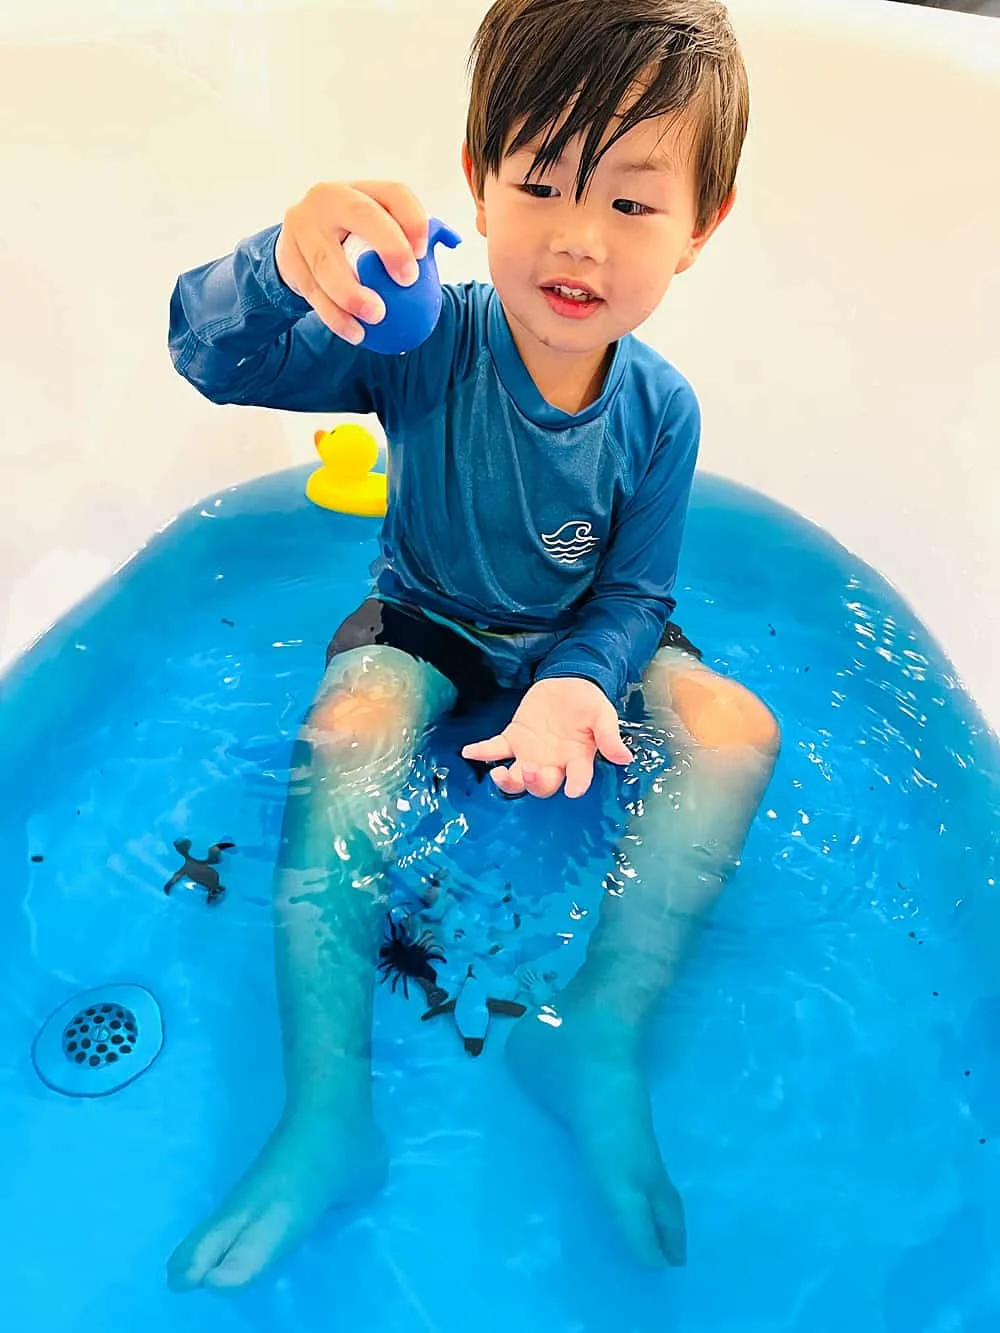 Using him again for an advert. Prefers to use this so he doesn't suffer  hypothermia from bathing, but can stay in the bath for ages with crayola  bath drops which he loves.